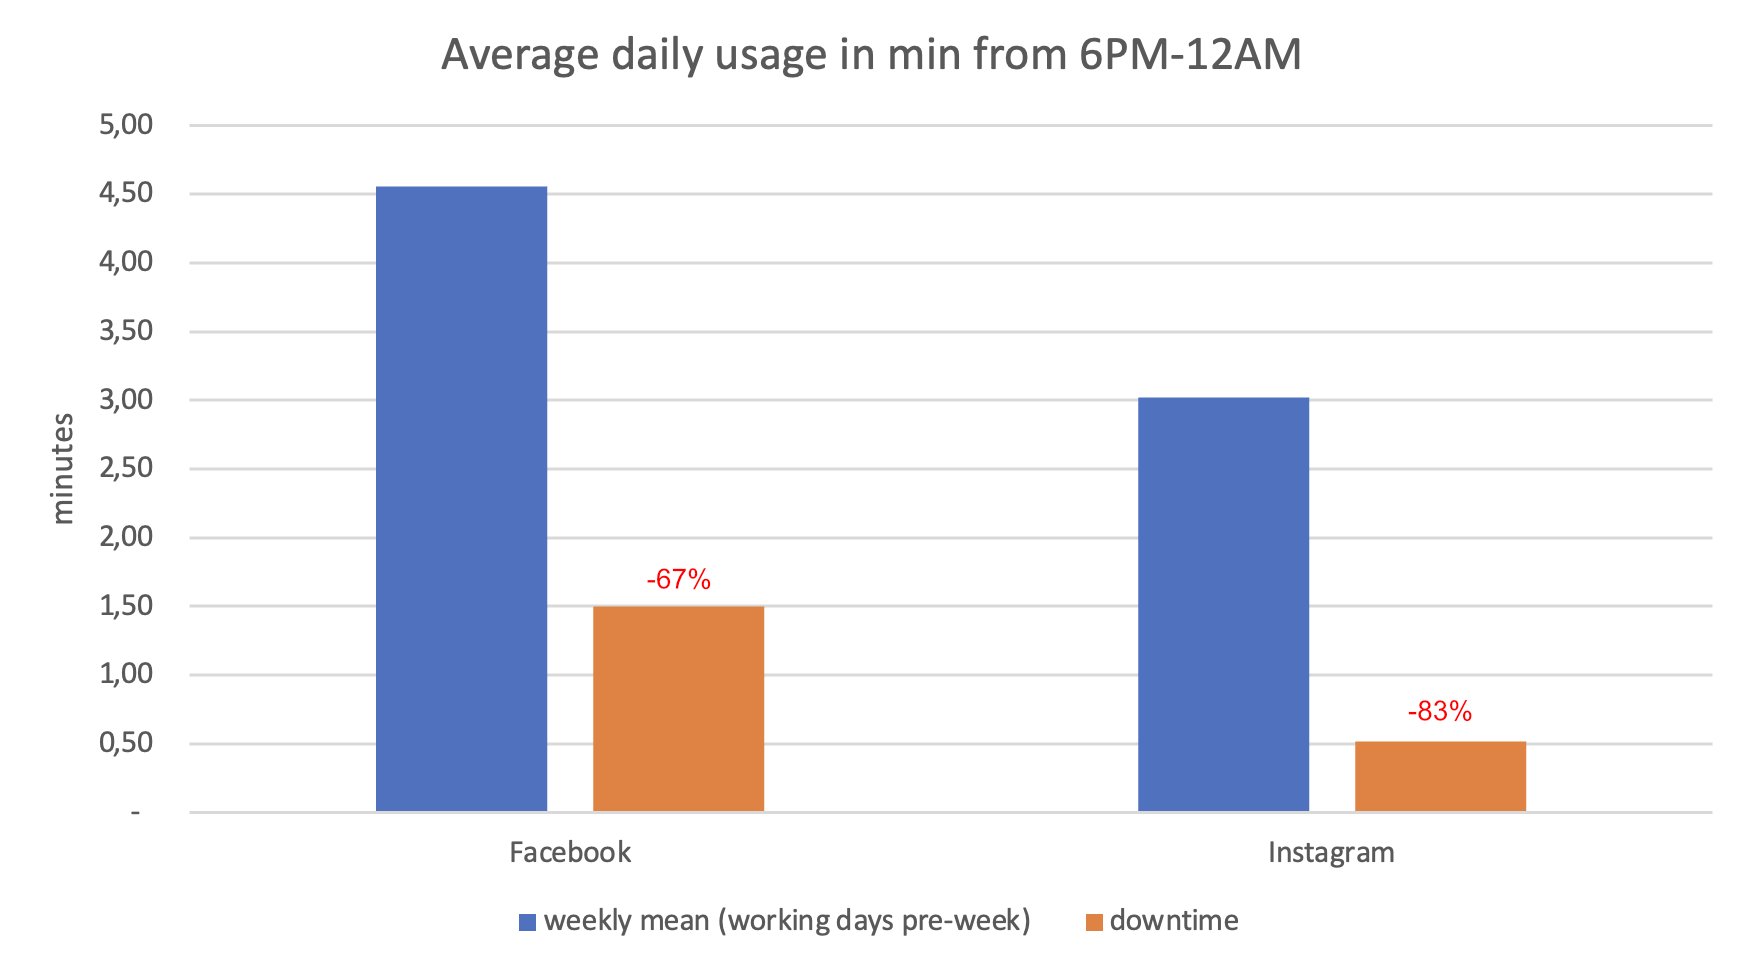 Average daily usage of social network apps in minutes from 6PM - 12AM